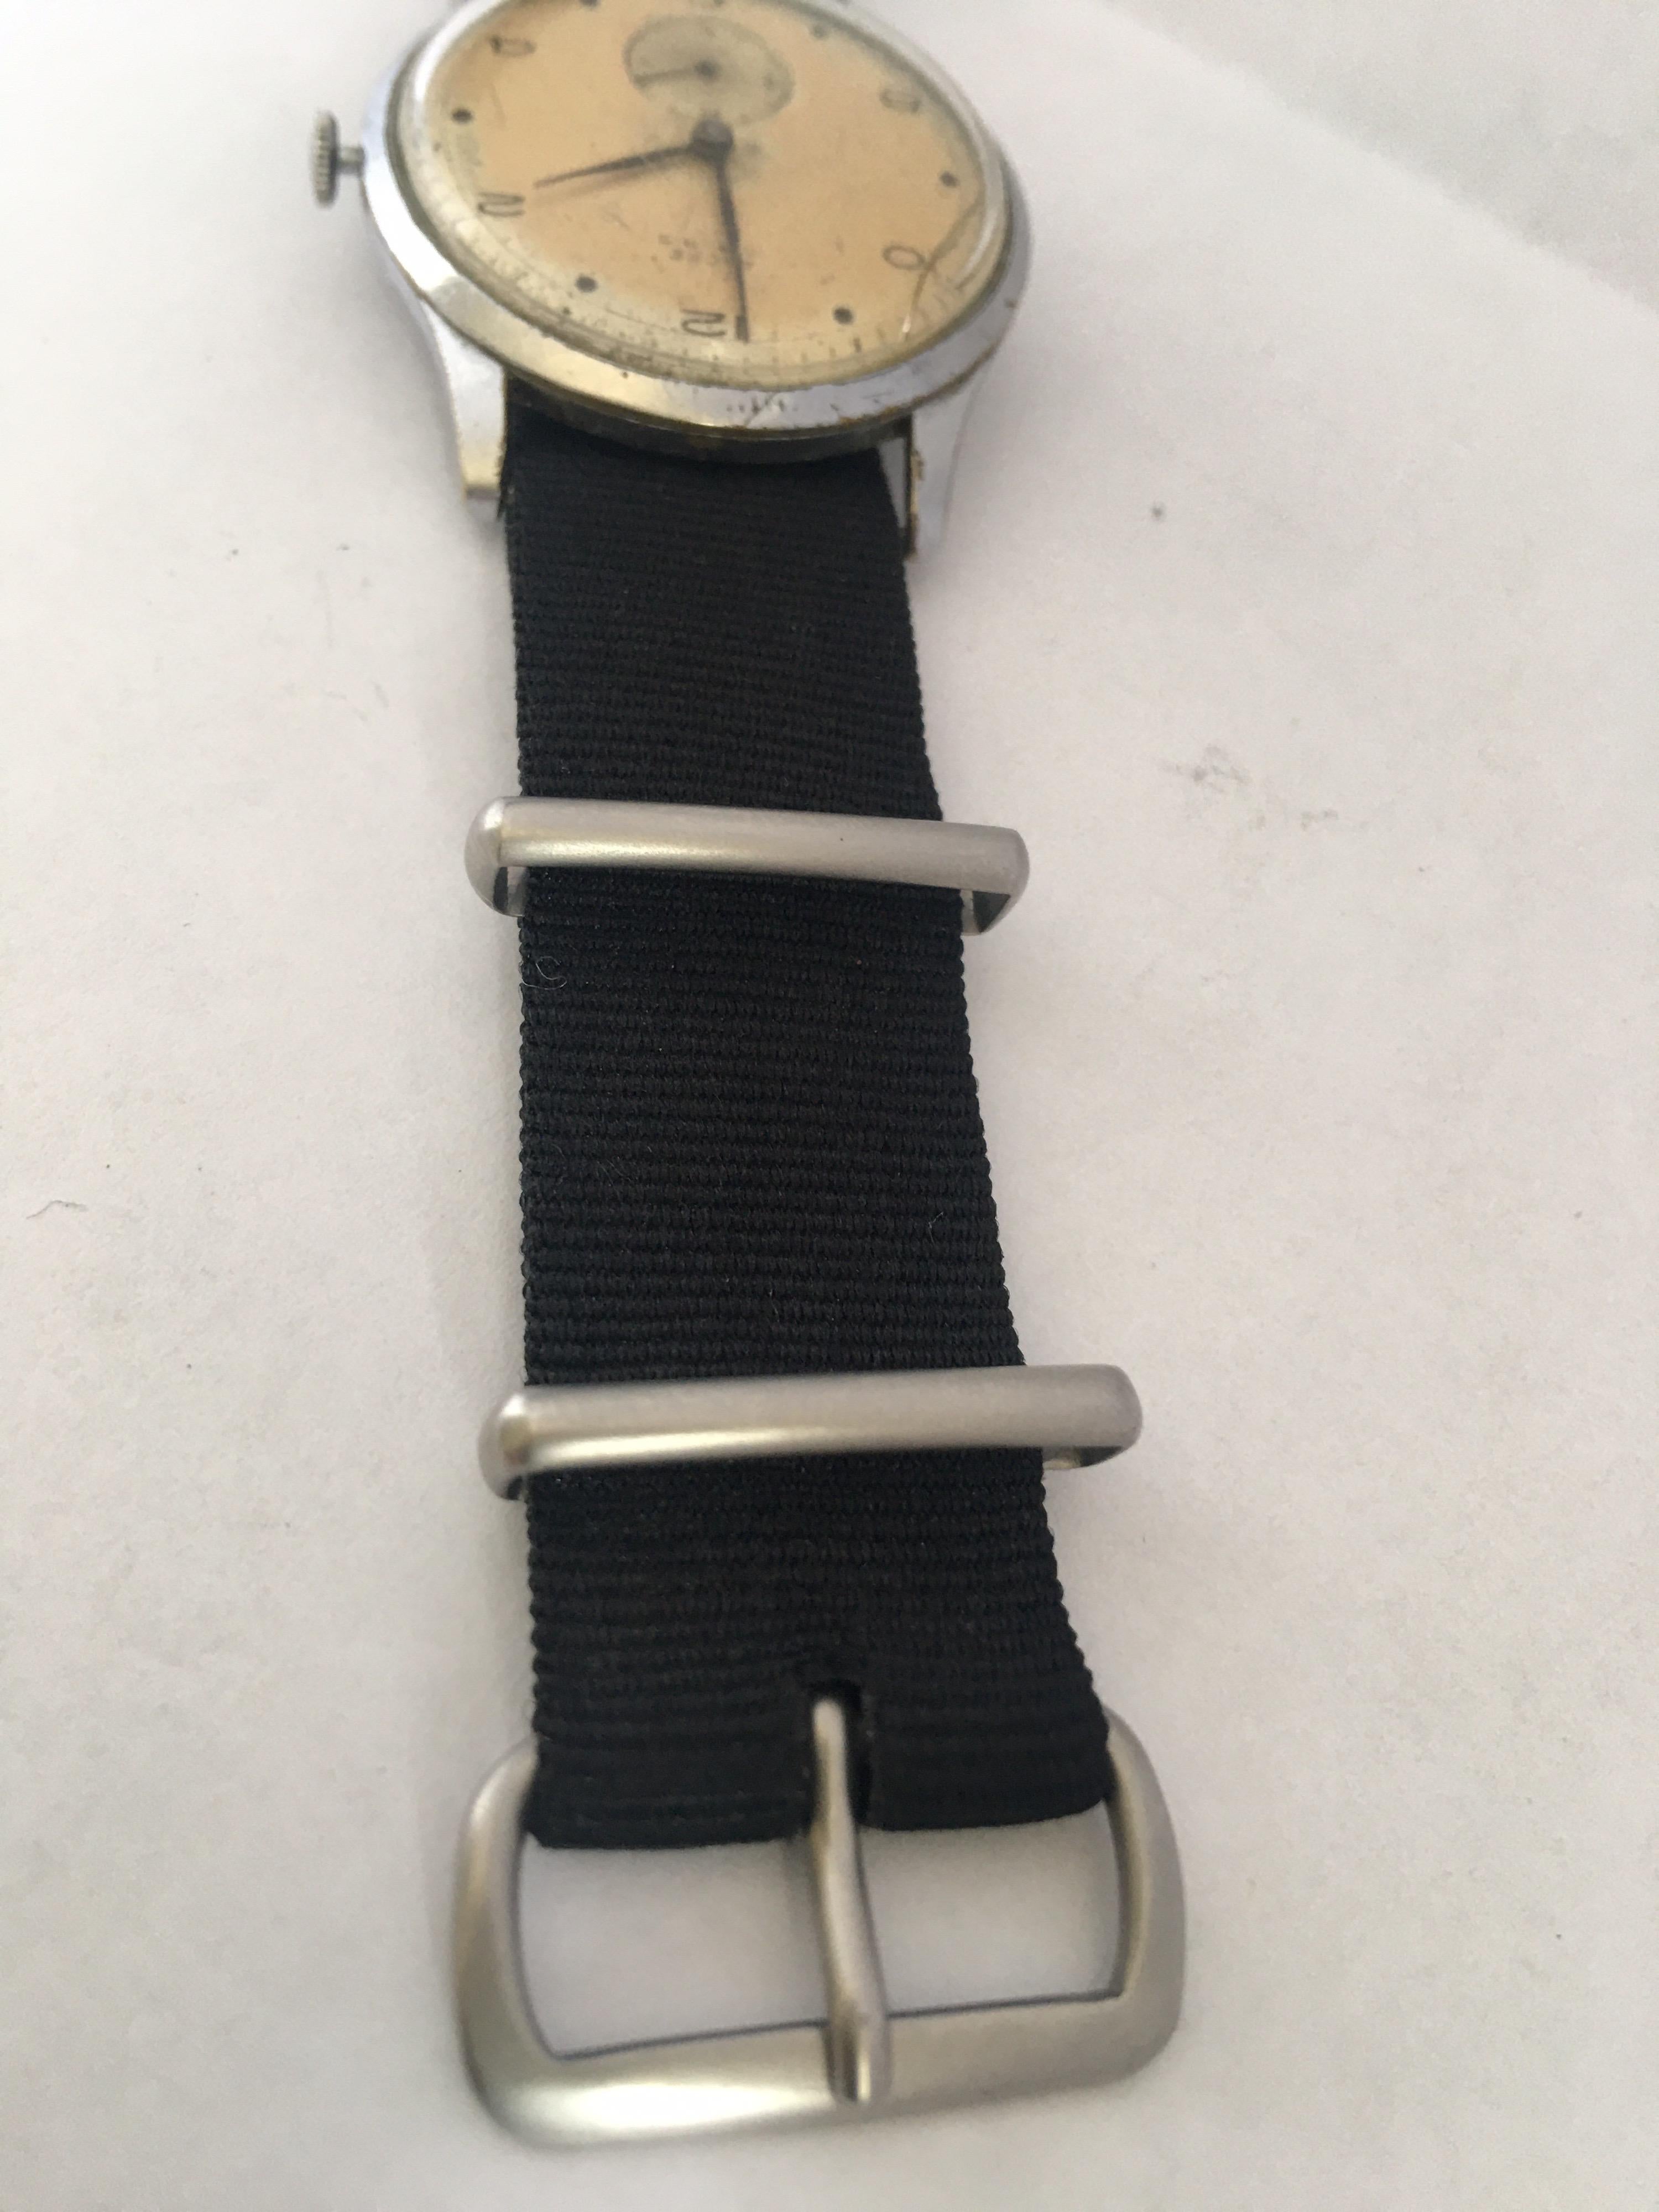 Vintage 1940s ANCRE Mechanical Watch For Sale 2